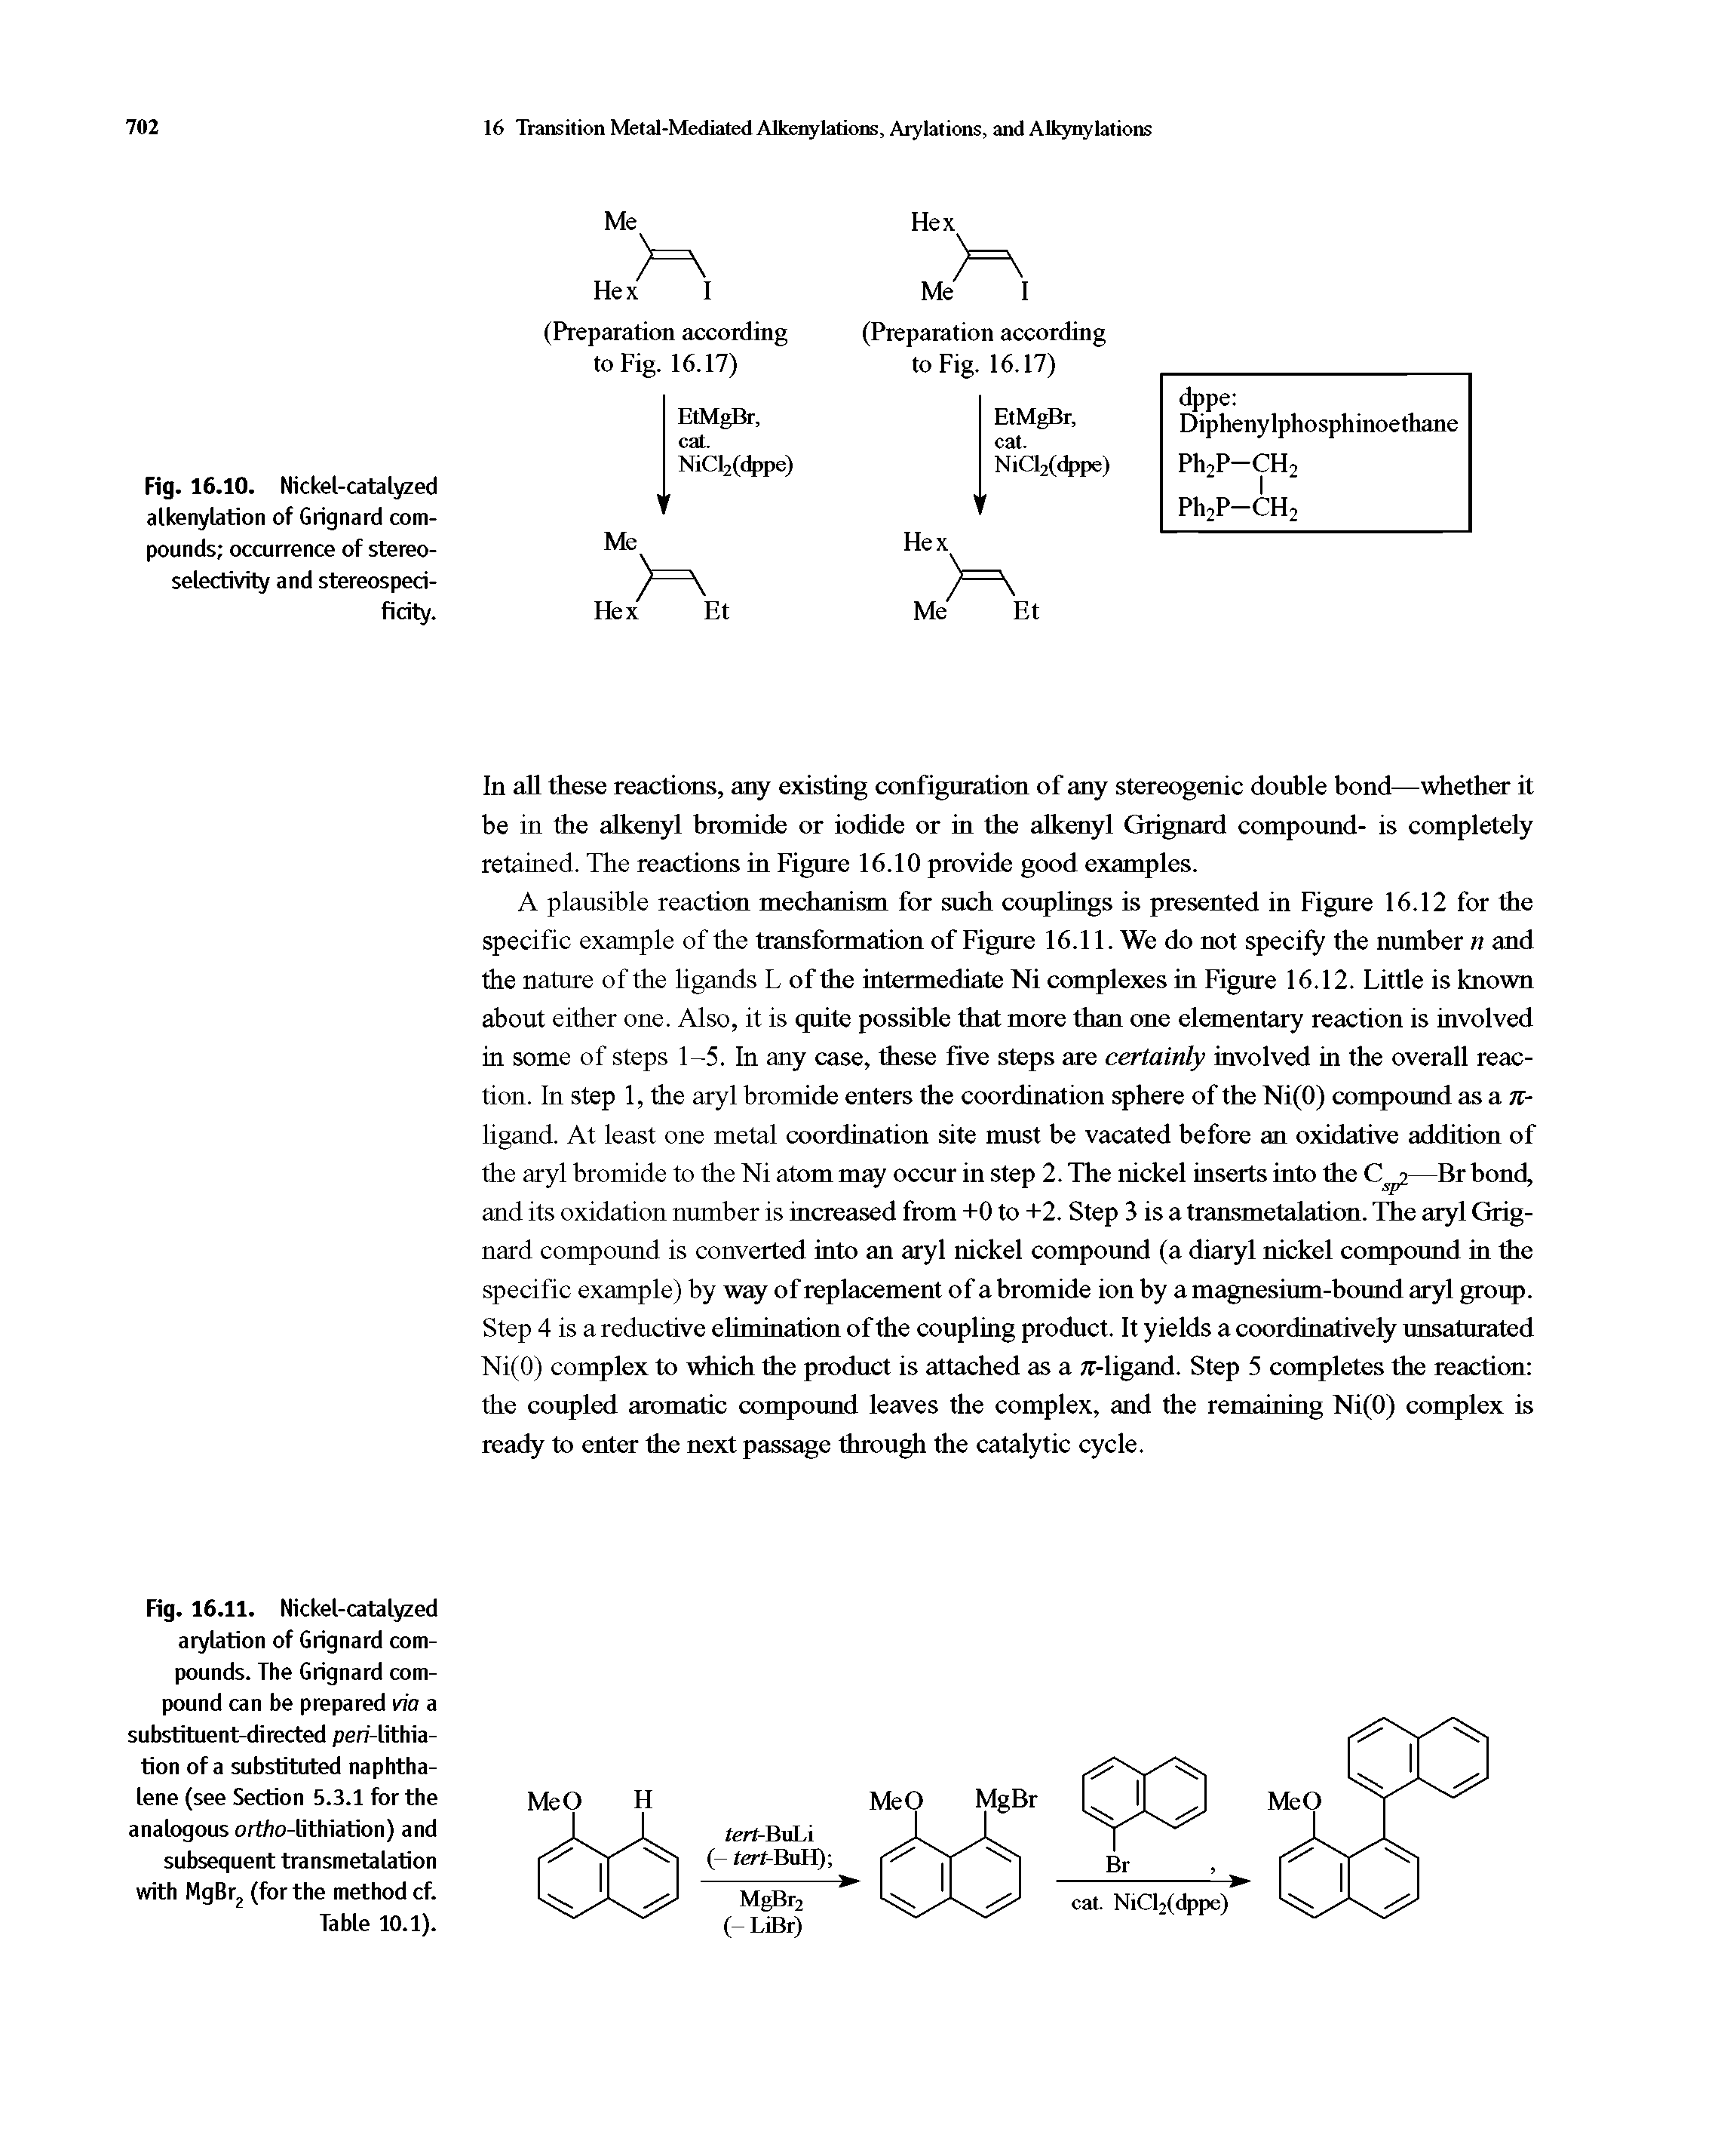 Fig. 16.11. Nickel-catalyzed arylation of Grignard compounds. The Grignard compound can be prepared via a substituent-directed peri-lithia-tion of a substituted naphthalene (see Section 5.3.1 for the analogous ortho-lithiation) and subsequent transmetalation with MgBr2 (for the method cf.